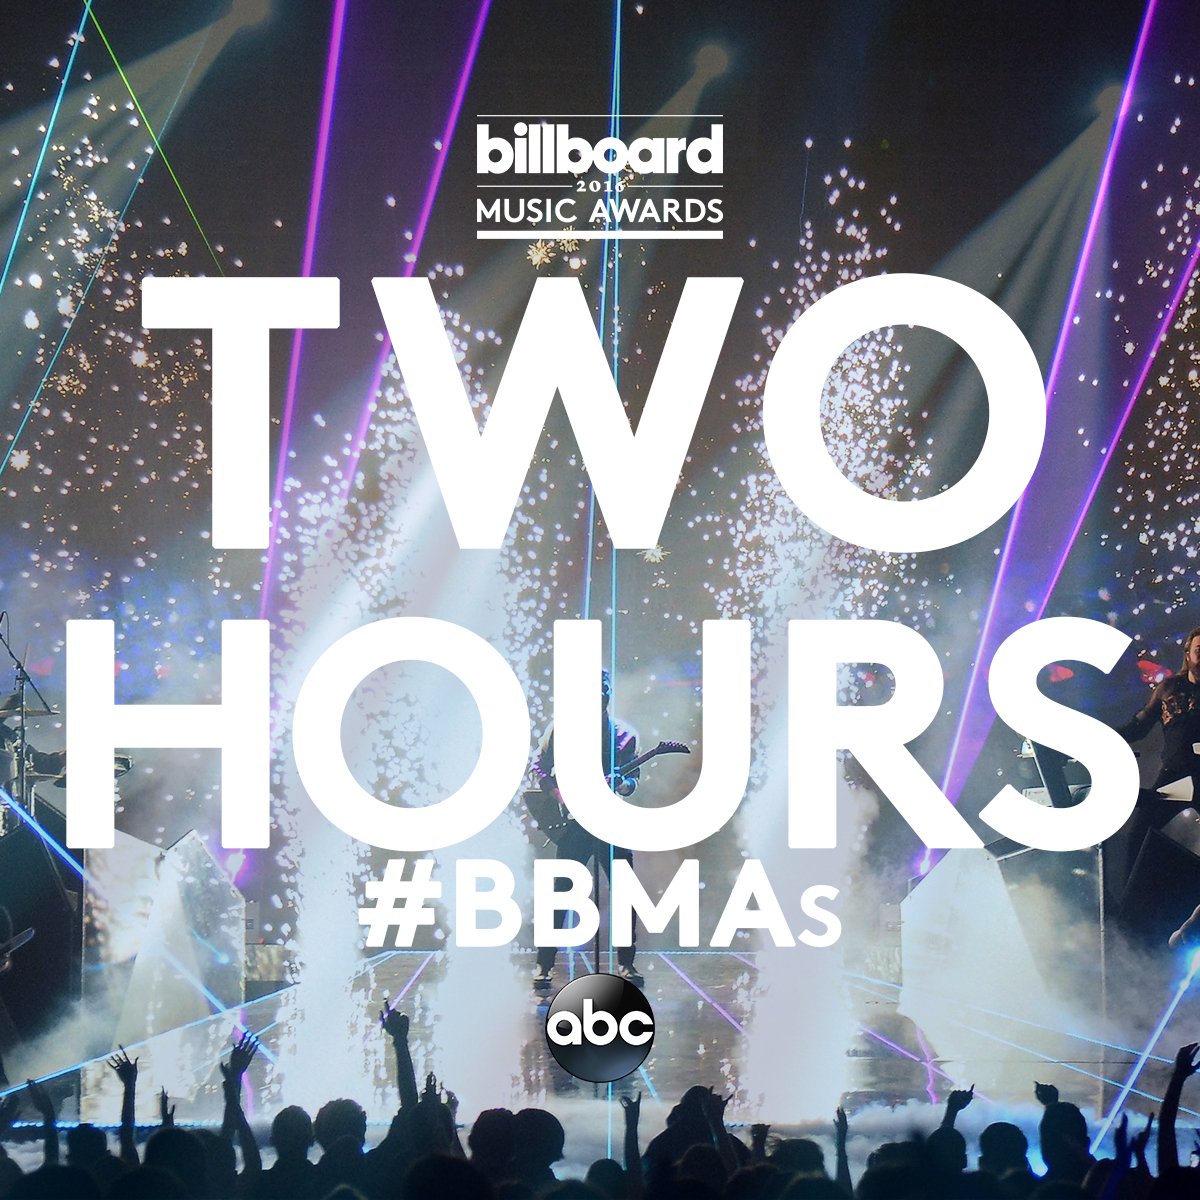 RT @BBMAs: TWO HOURS until the #BBMAs hit the air! Turn on ABC & join hosts @ciara & @Ludacris at 8e/5p. Don't miss it! https://t.co/sGL5R2…